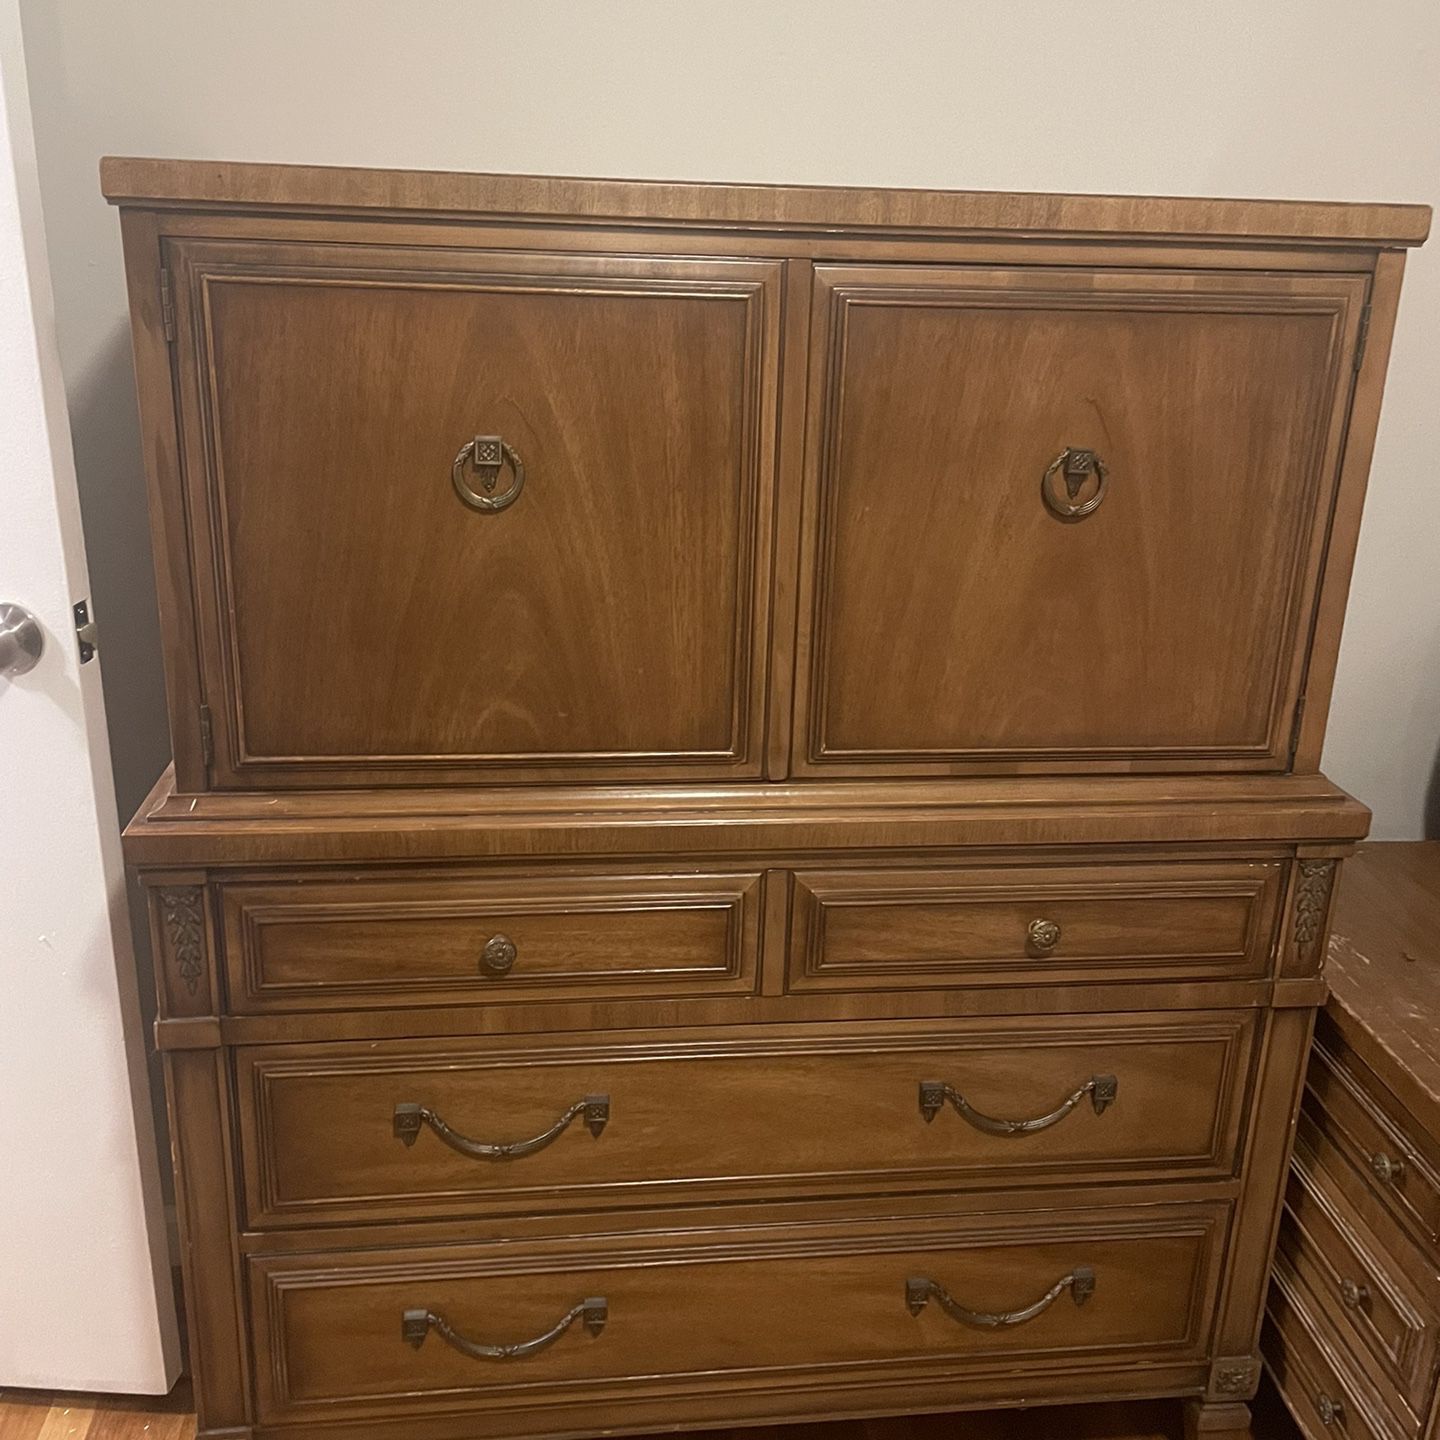 Antique Chest Of Drawers/Armoire for Personal Items